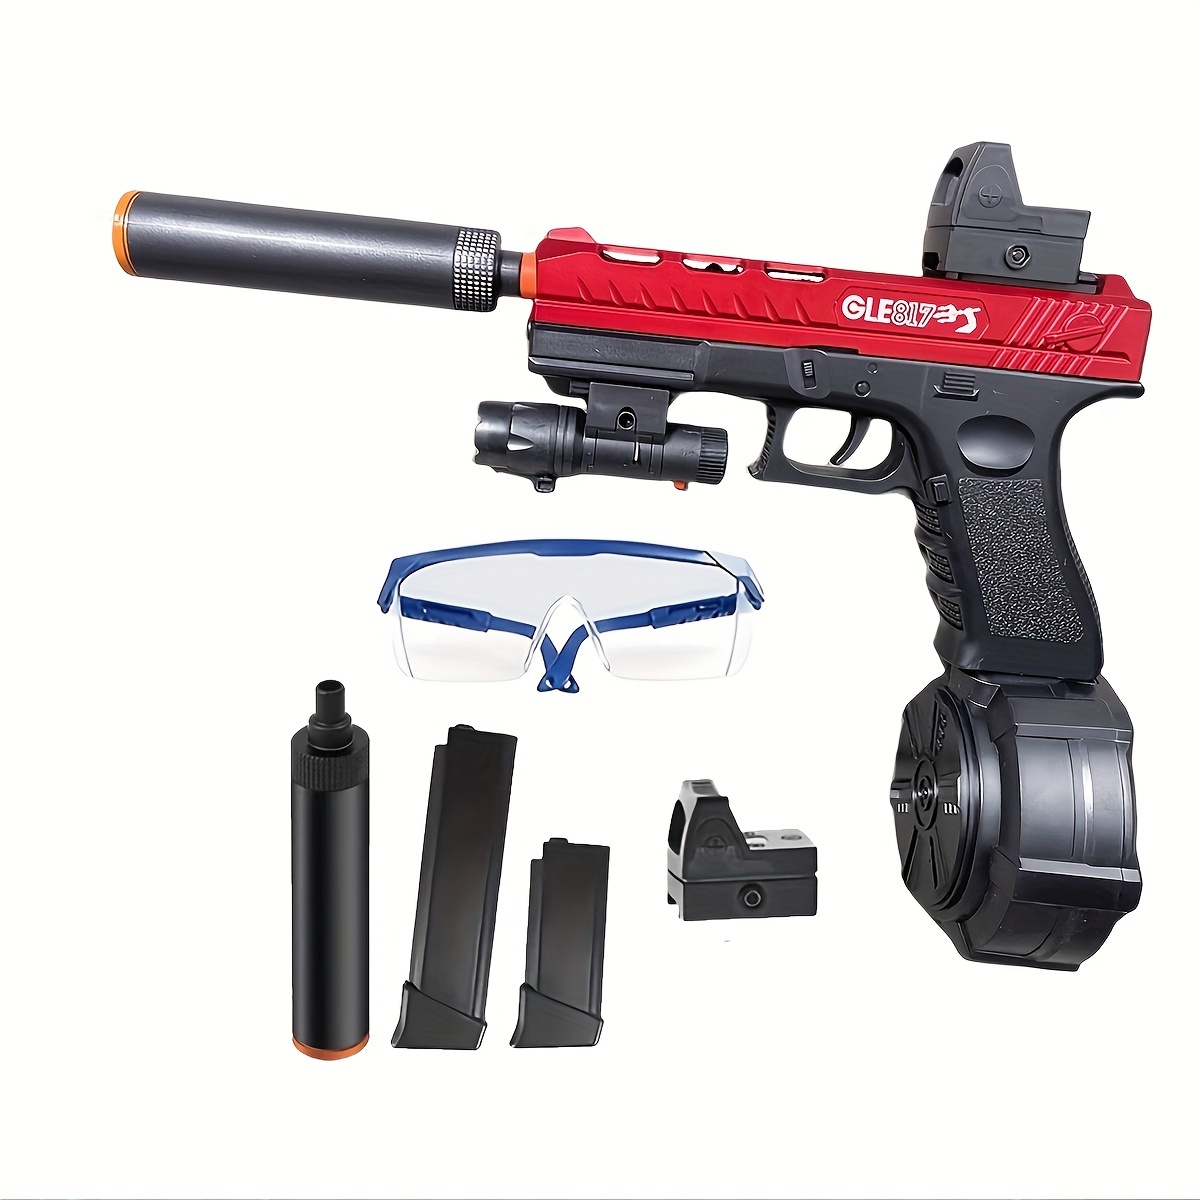 Orby Gun Blaster - Wholesale Prices and Free Shipping